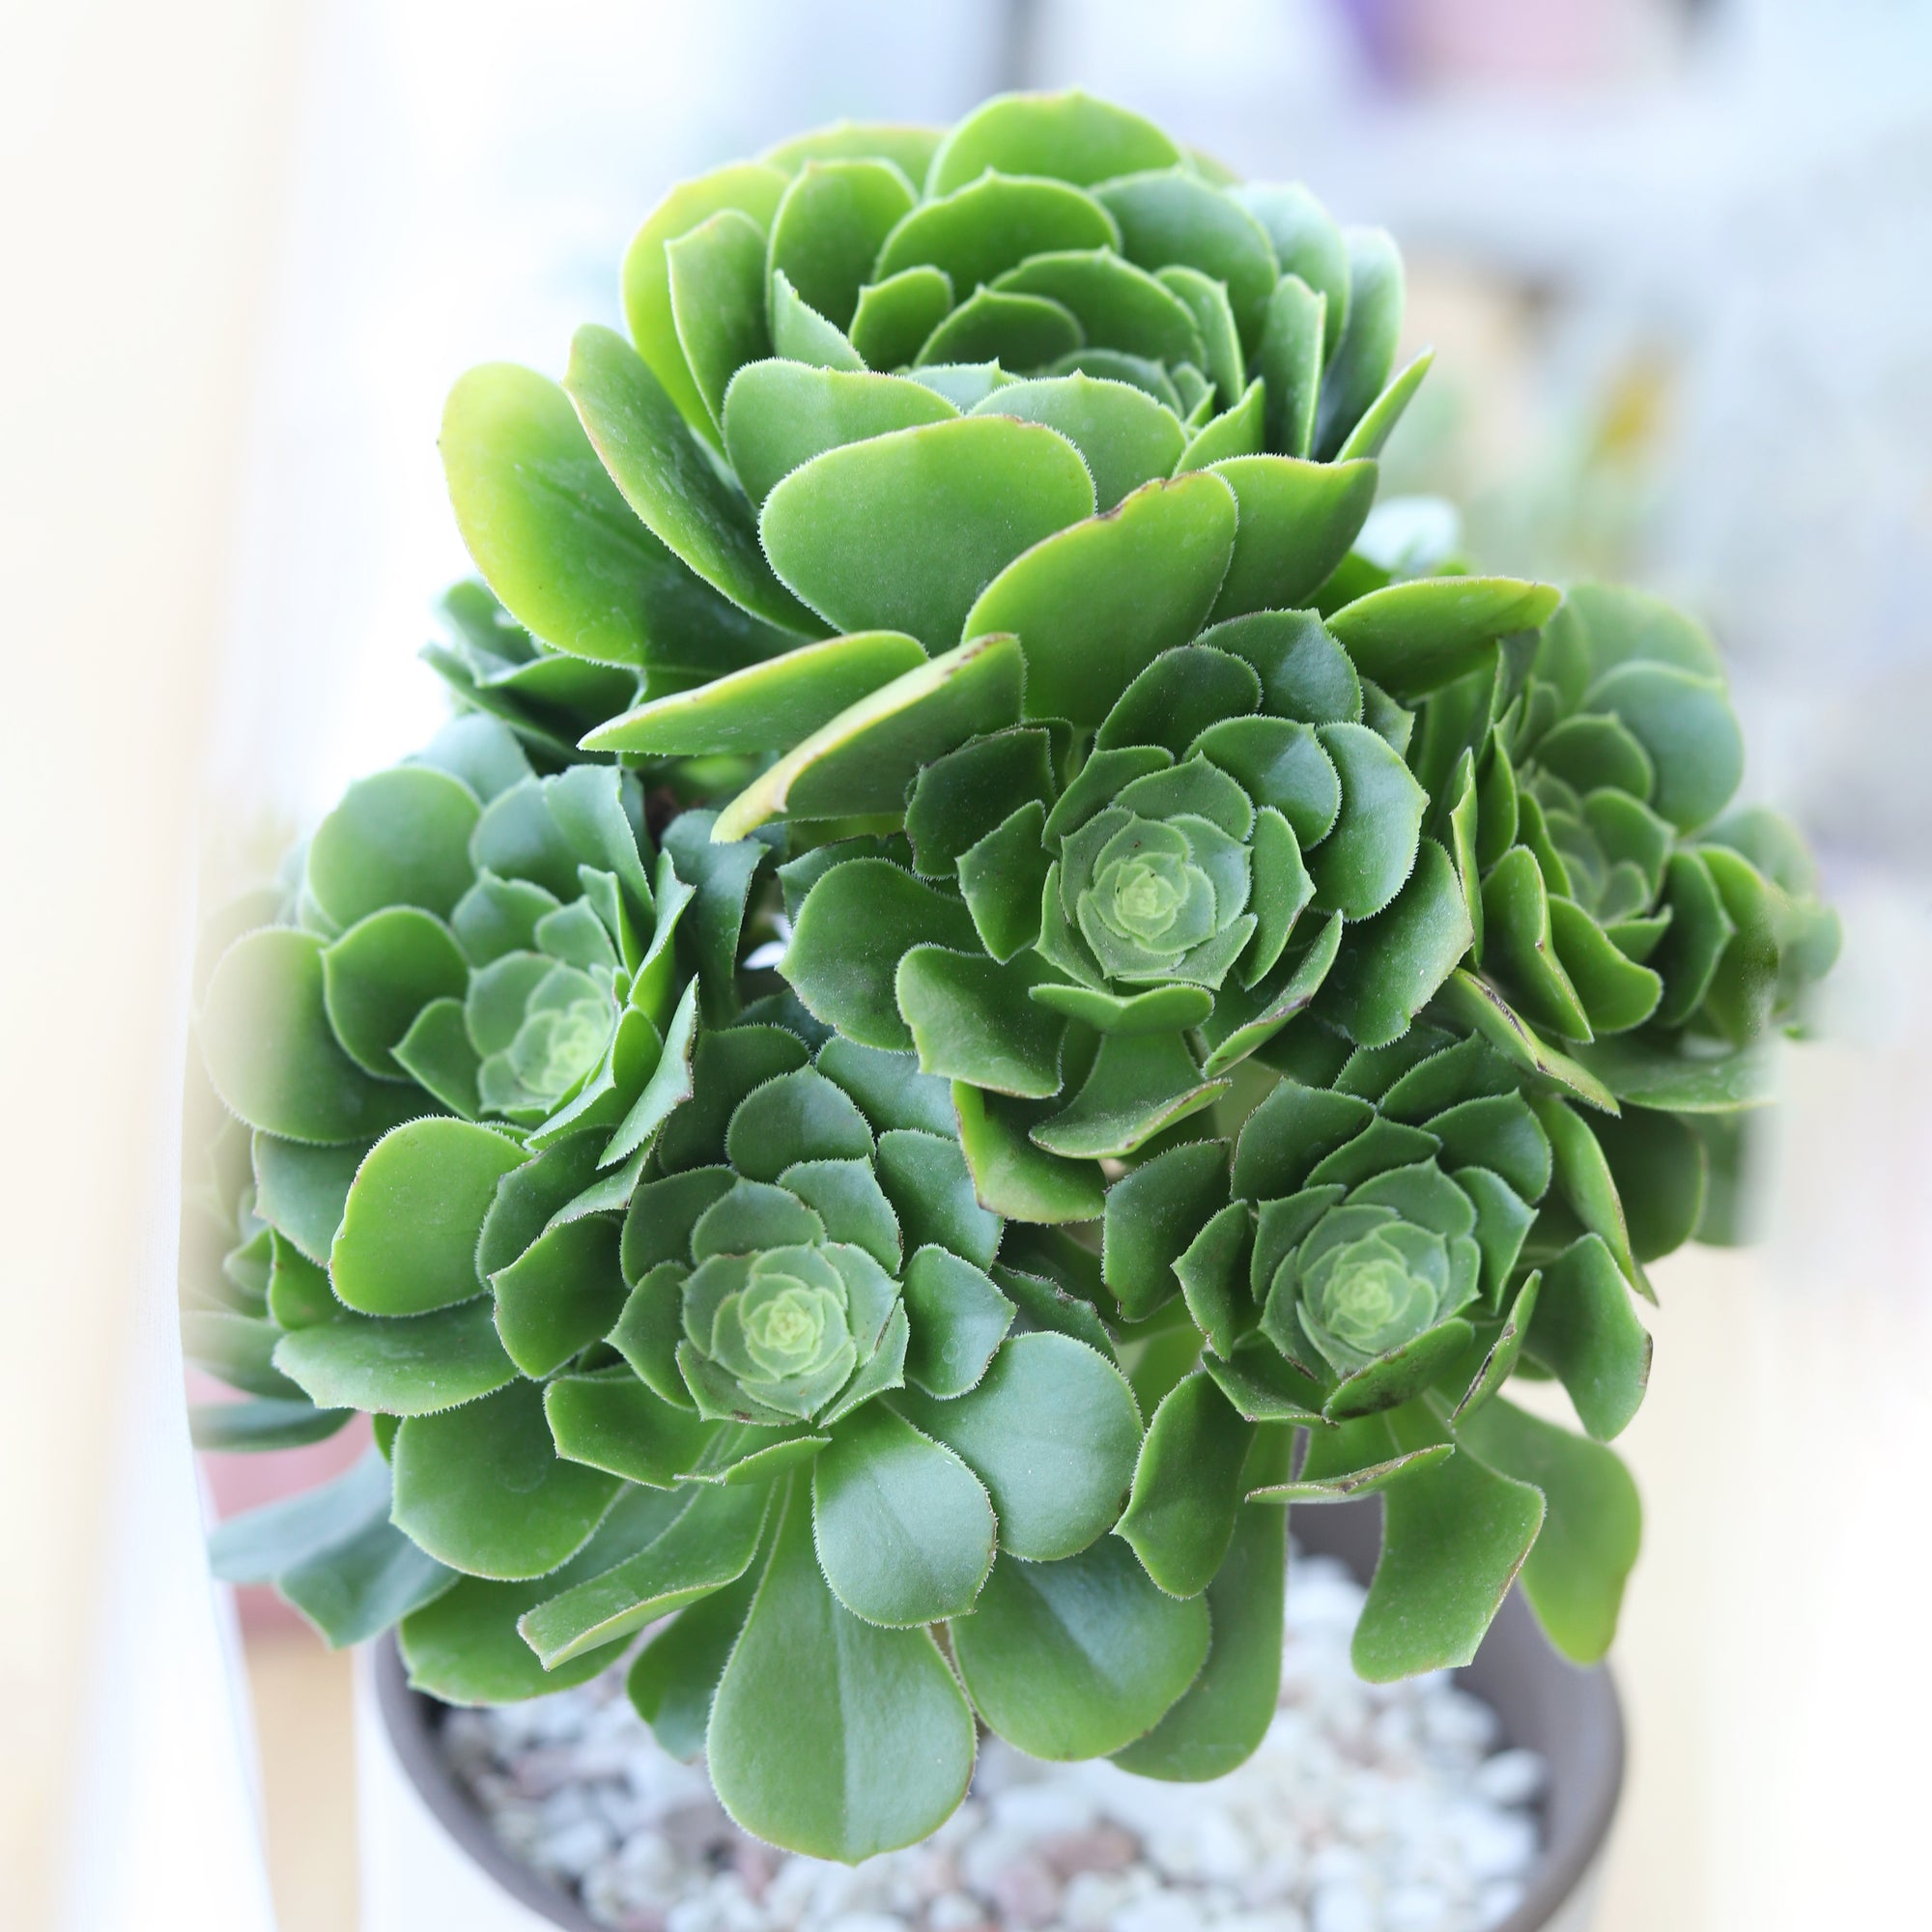 Rosularia Platyphylla Succulent Plant, Succulent Plant for sale, buy succulent online, Holiday decor ideas, Succulent gifts 